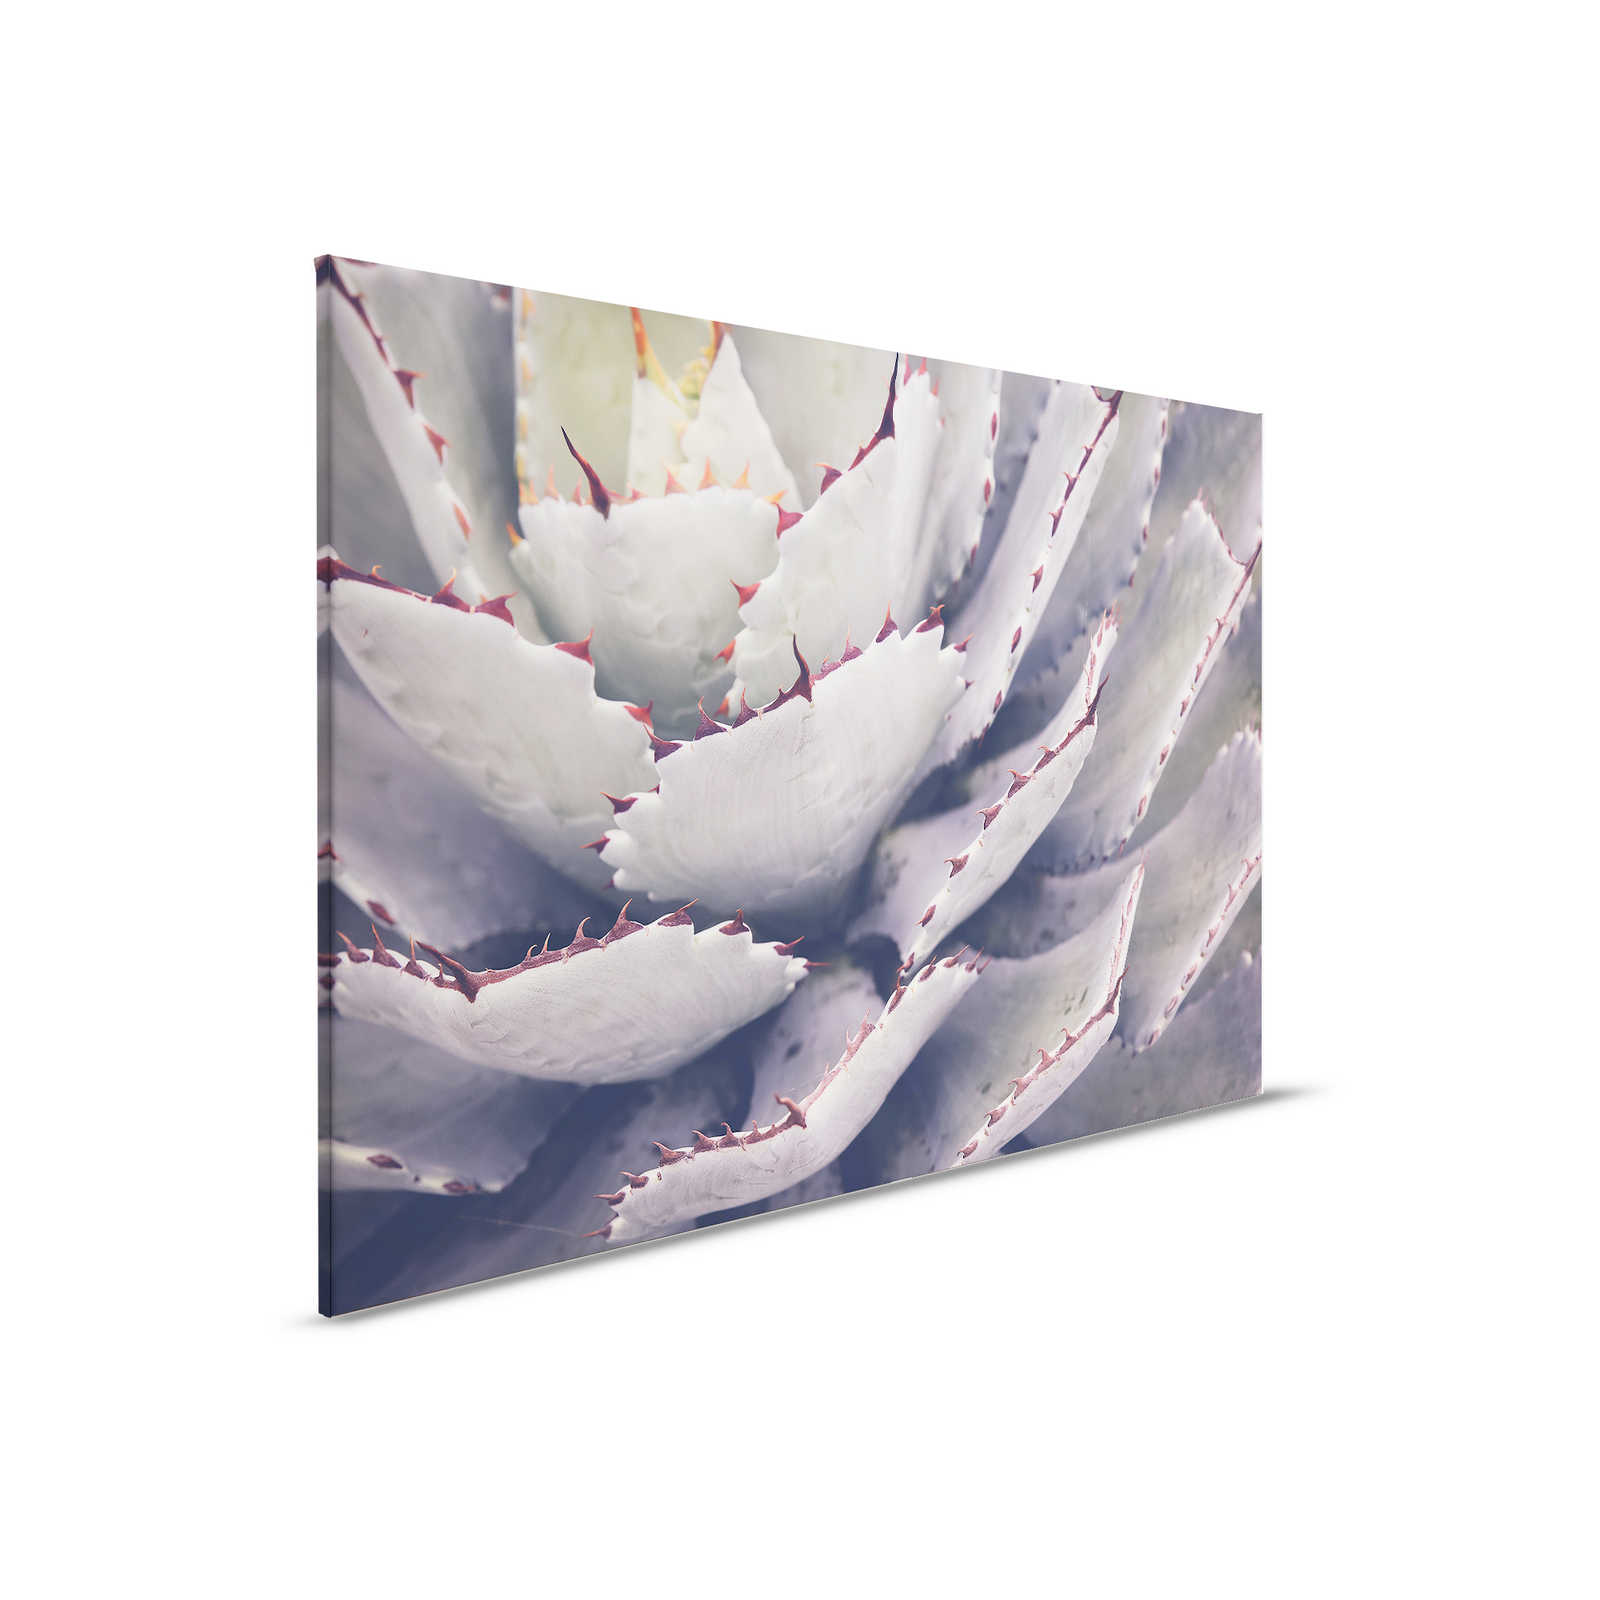 Canvas painting with close-up of a cactus - 0.90 m x 0.60 m
